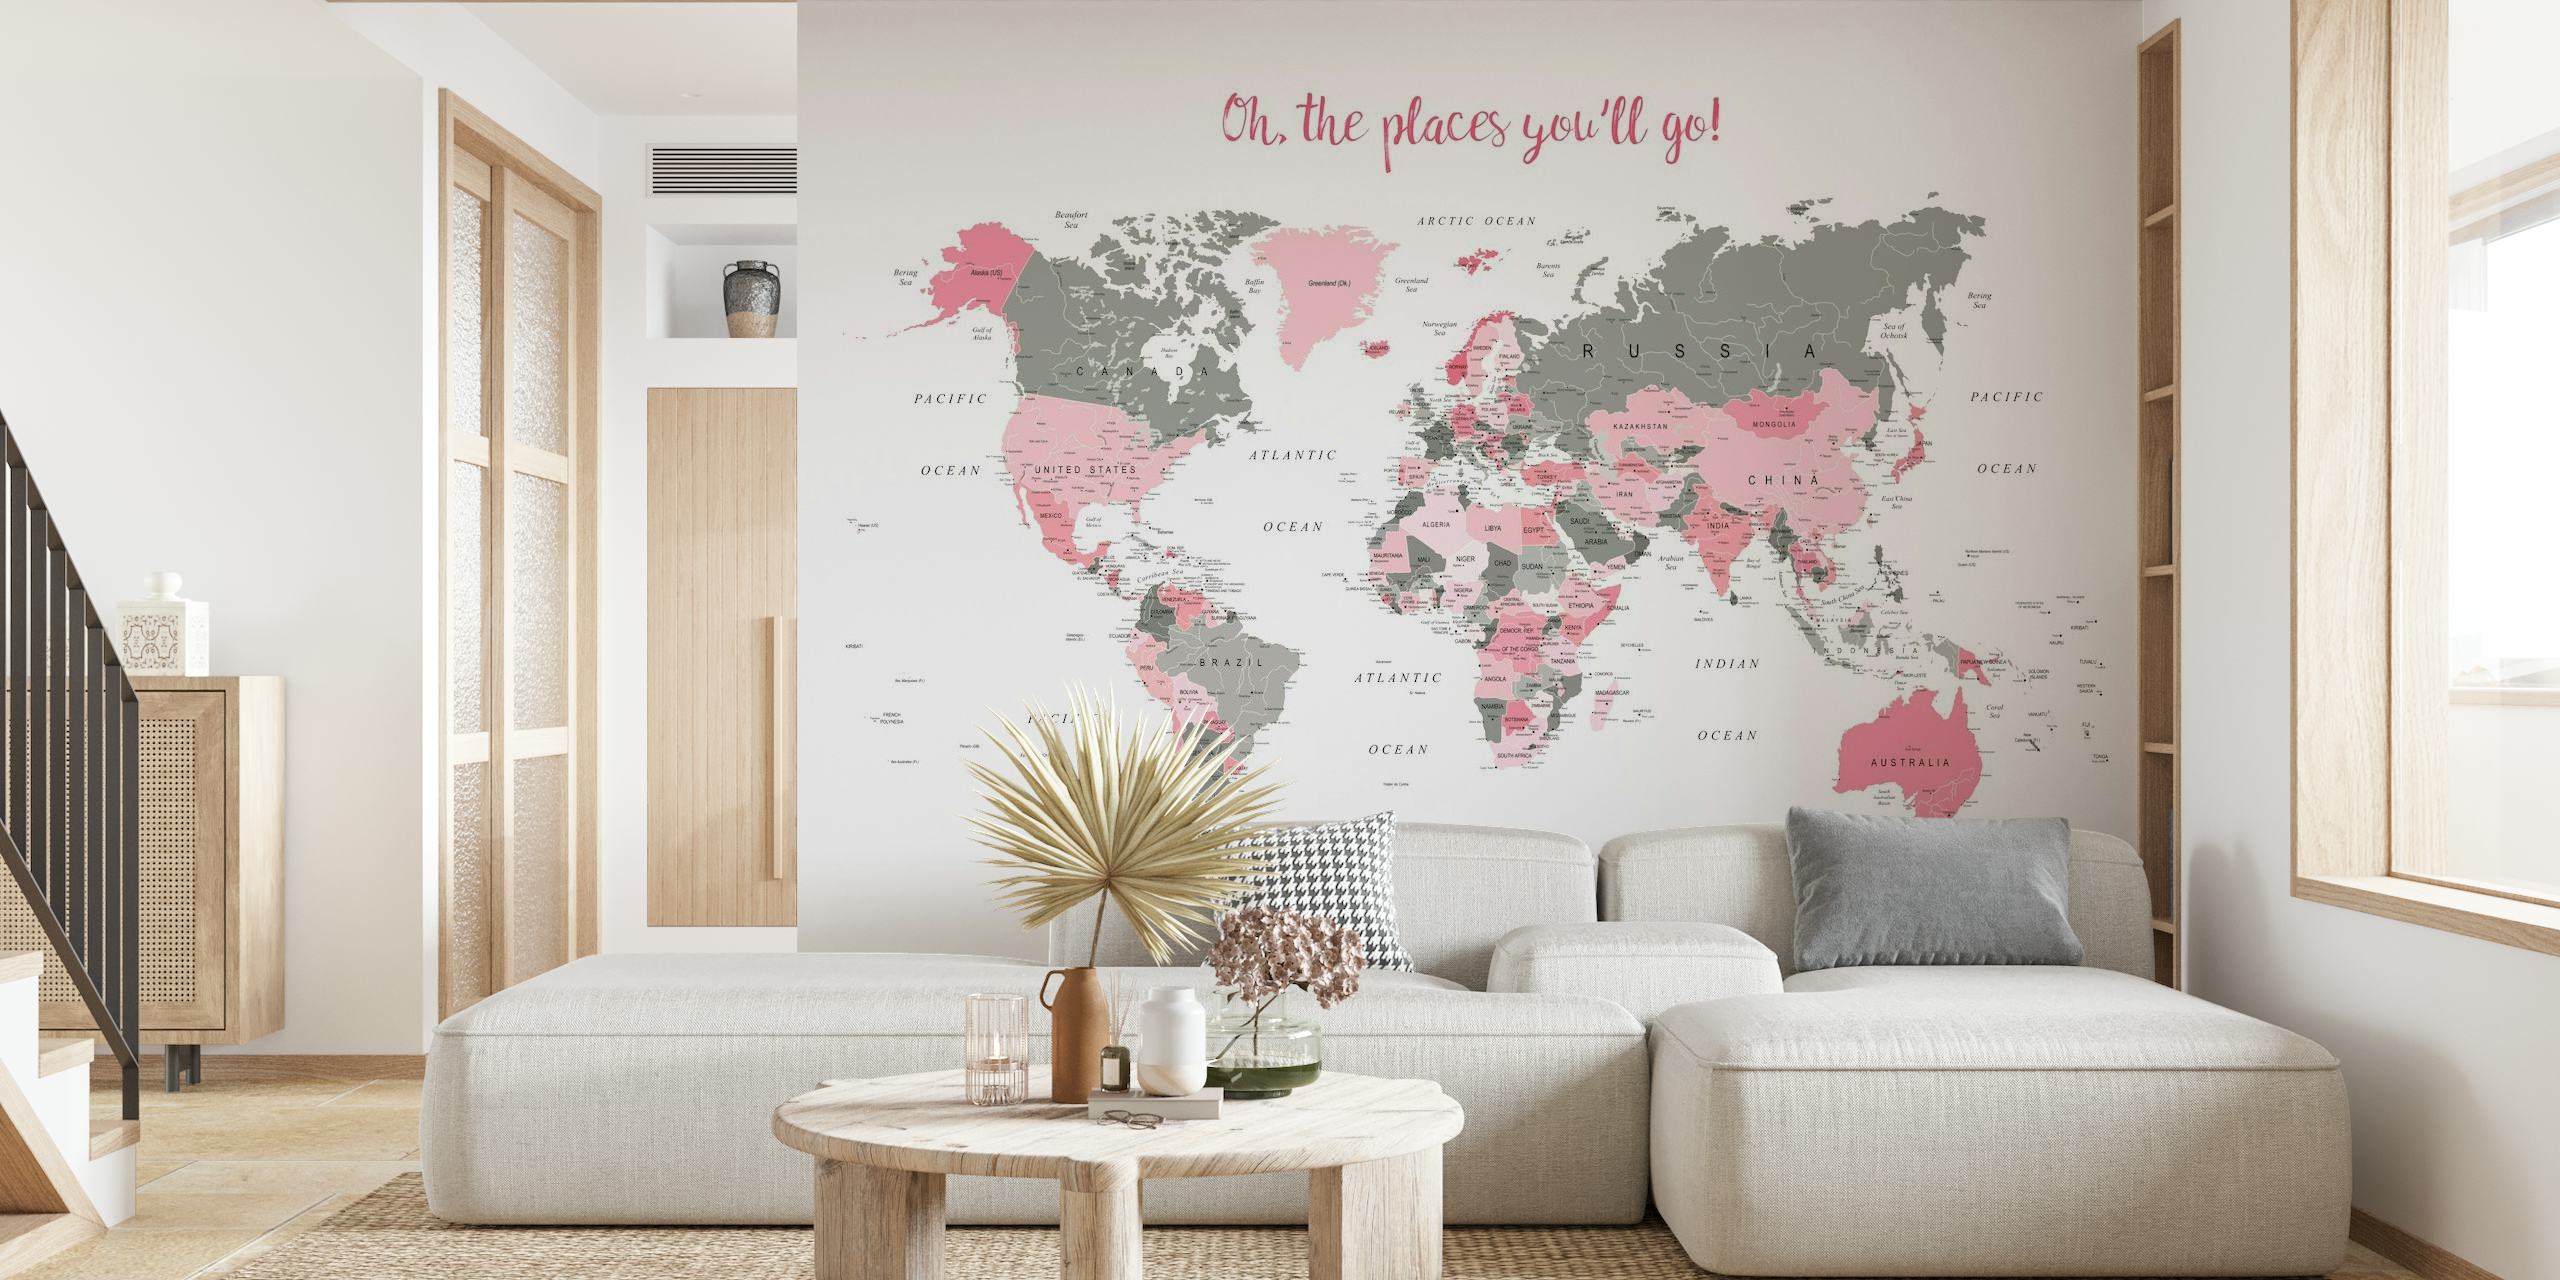 Stylish world map wall mural with pink highlights and phrase 'Oh The Places You'll Go!' for home decor.